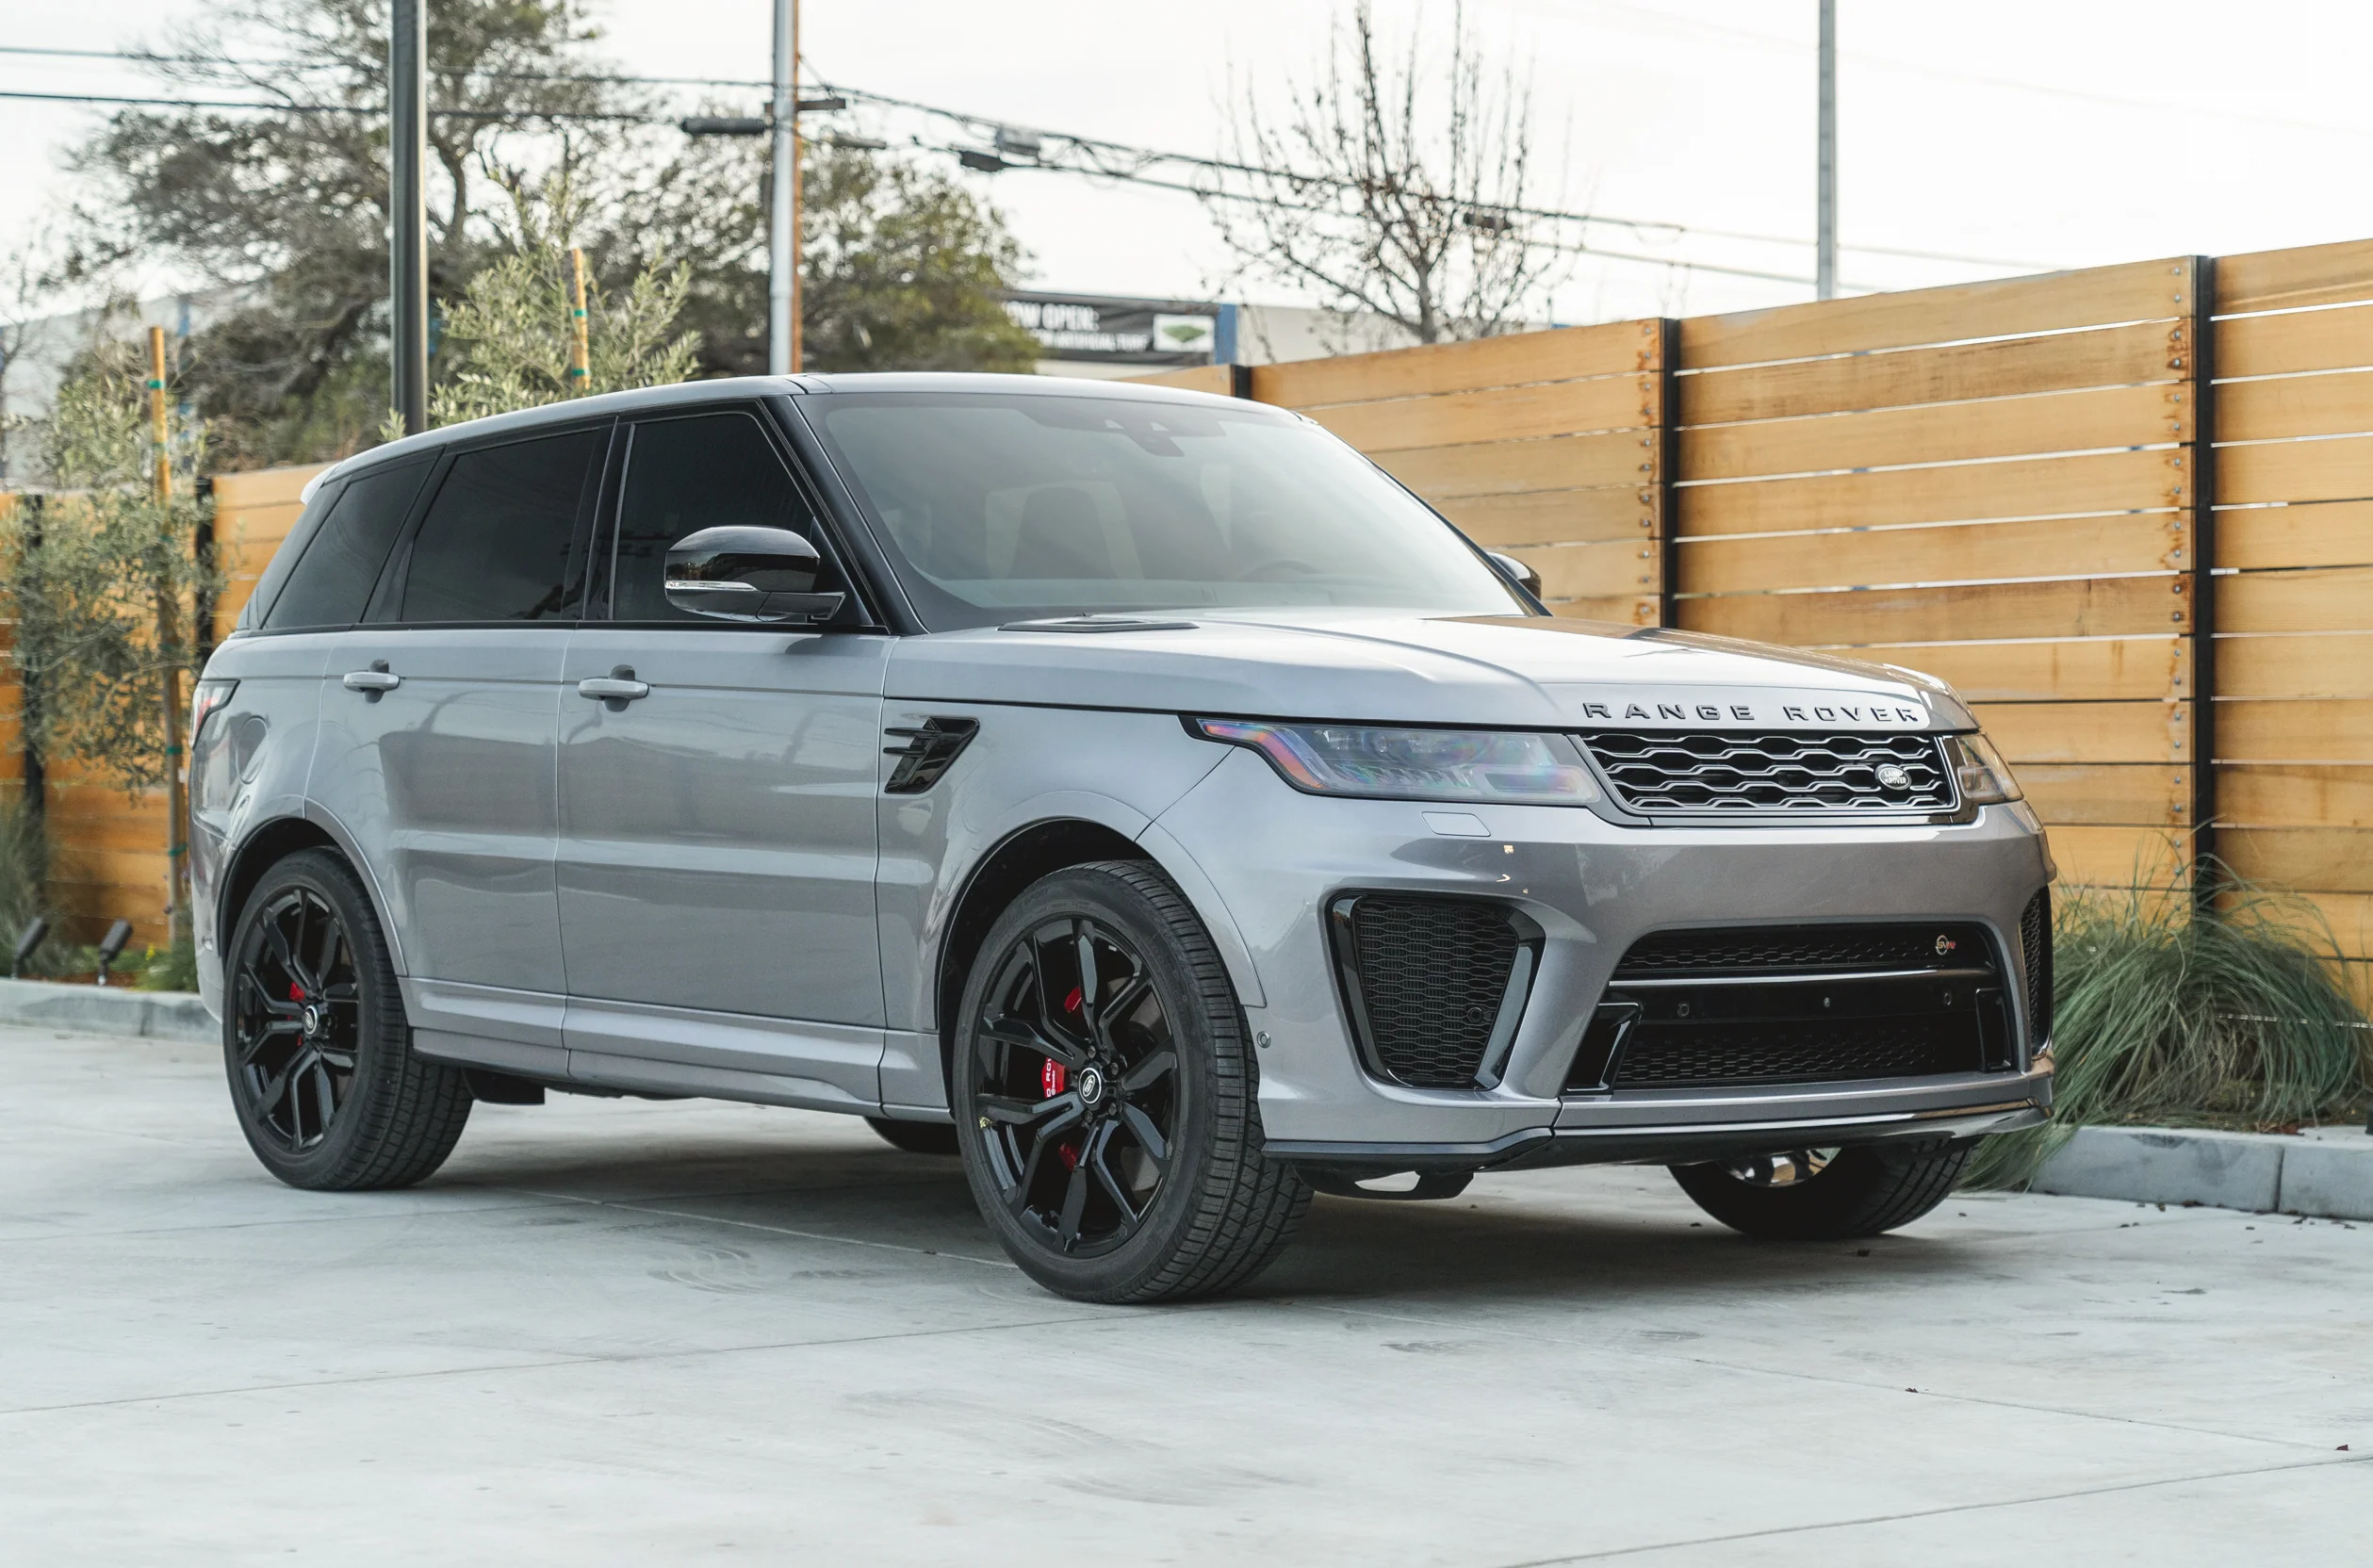 How Much Is It To Rent A Range Rover SVR In Dubai